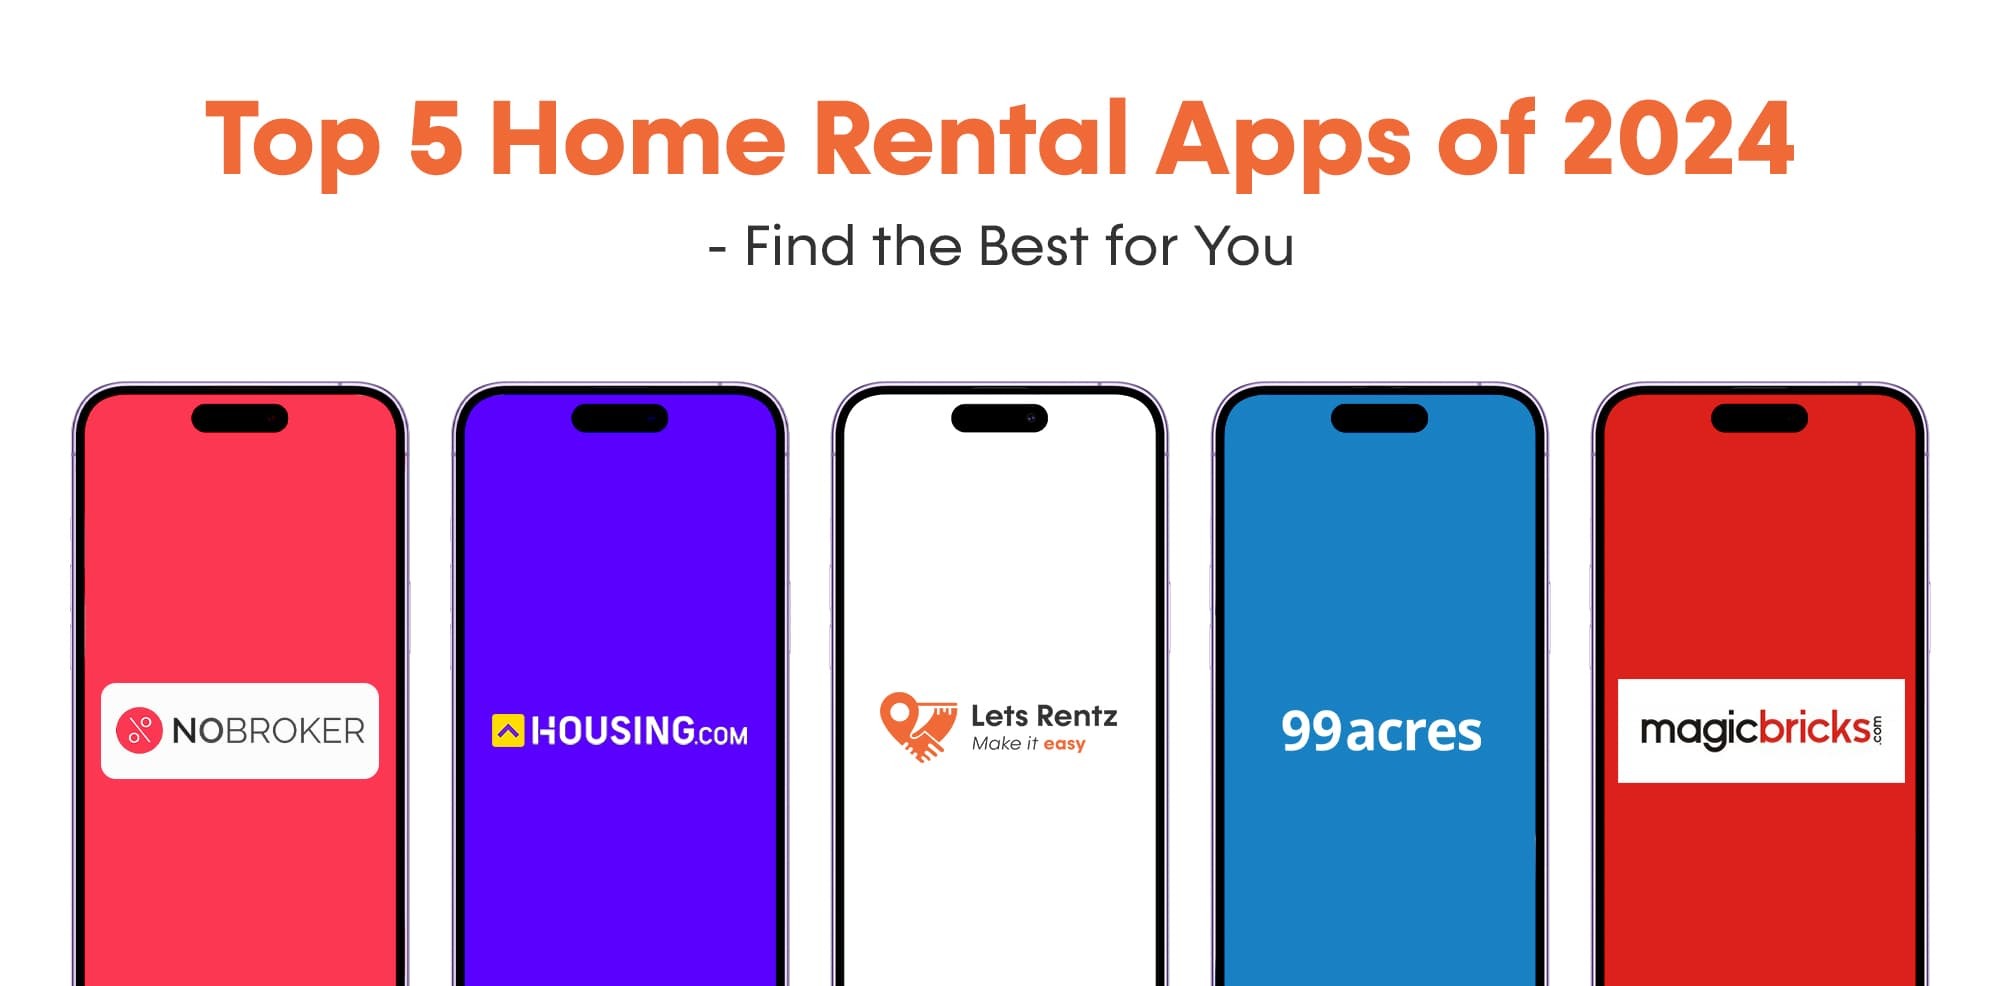 Top 5 Home Rental Apps of 2024 – Find the Best for You